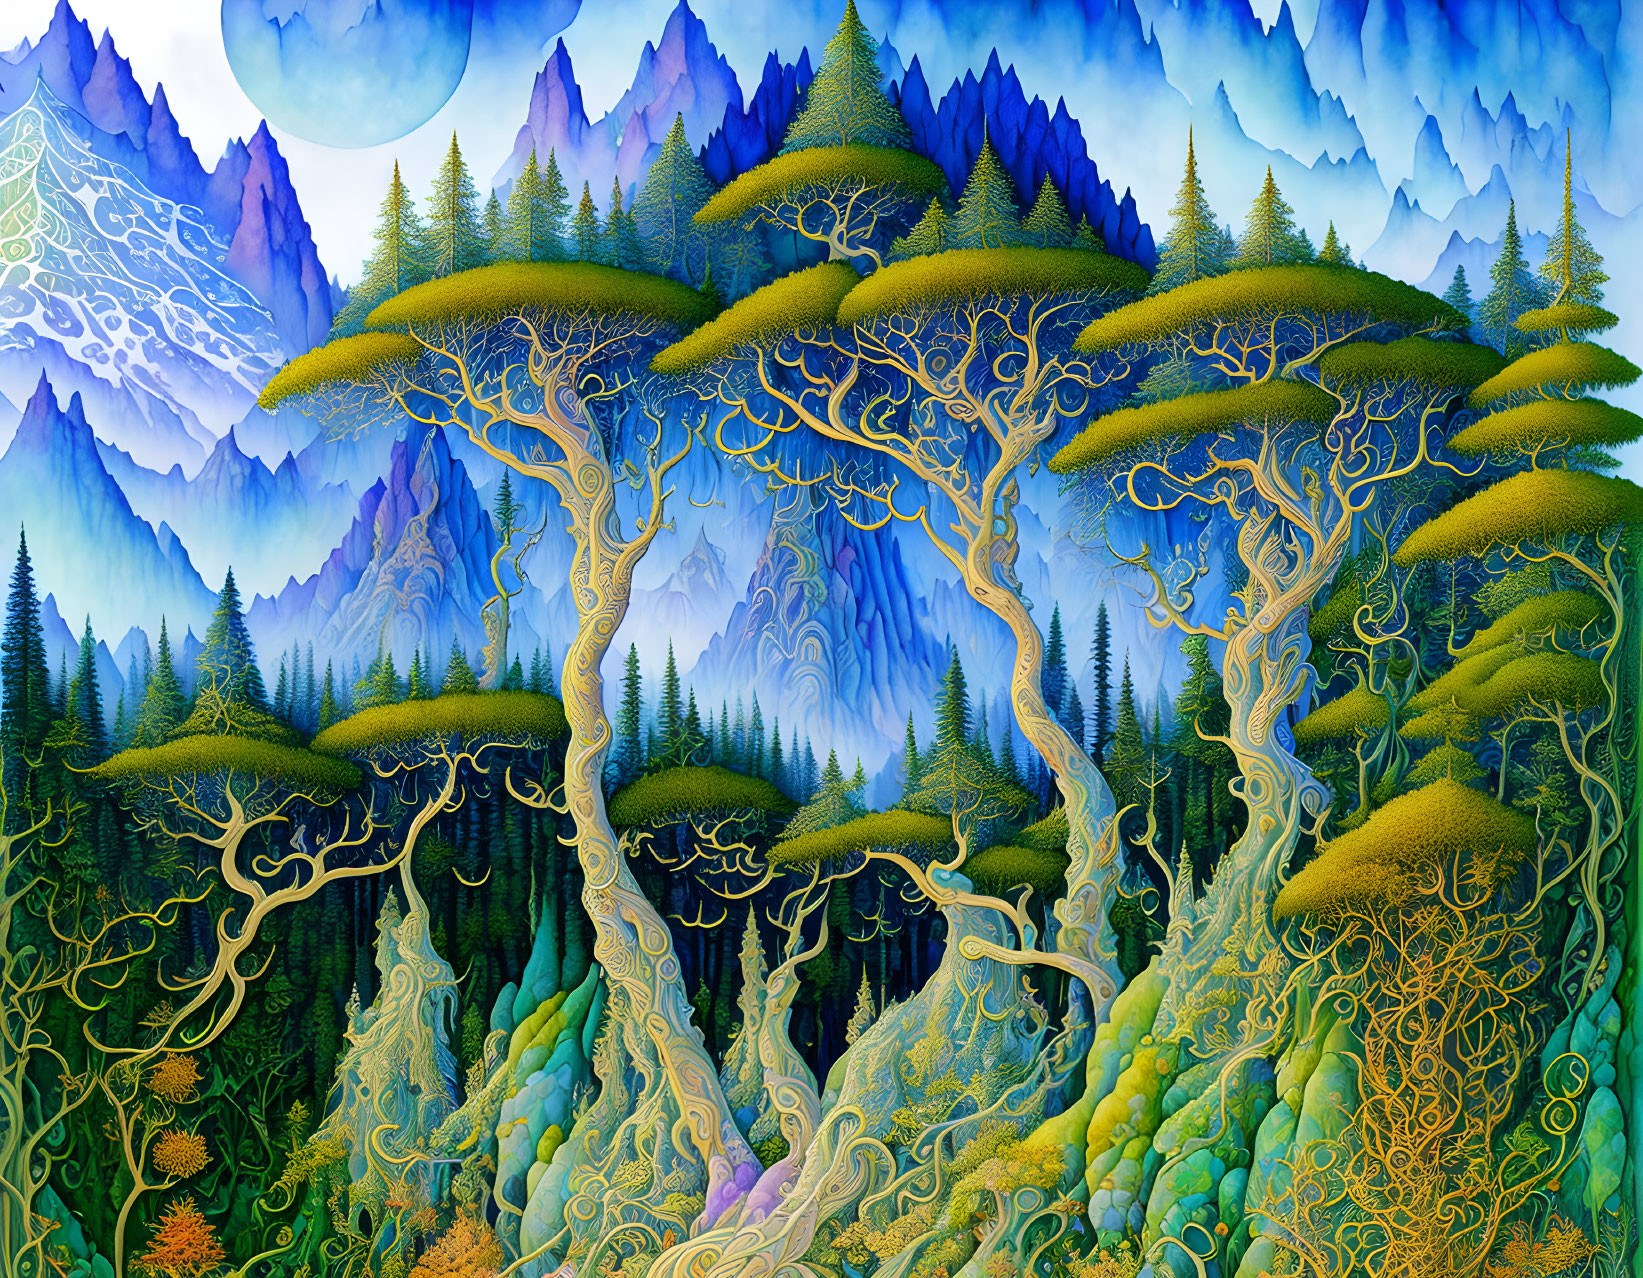 Surreal landscape painting with stylized trees and blue mountains